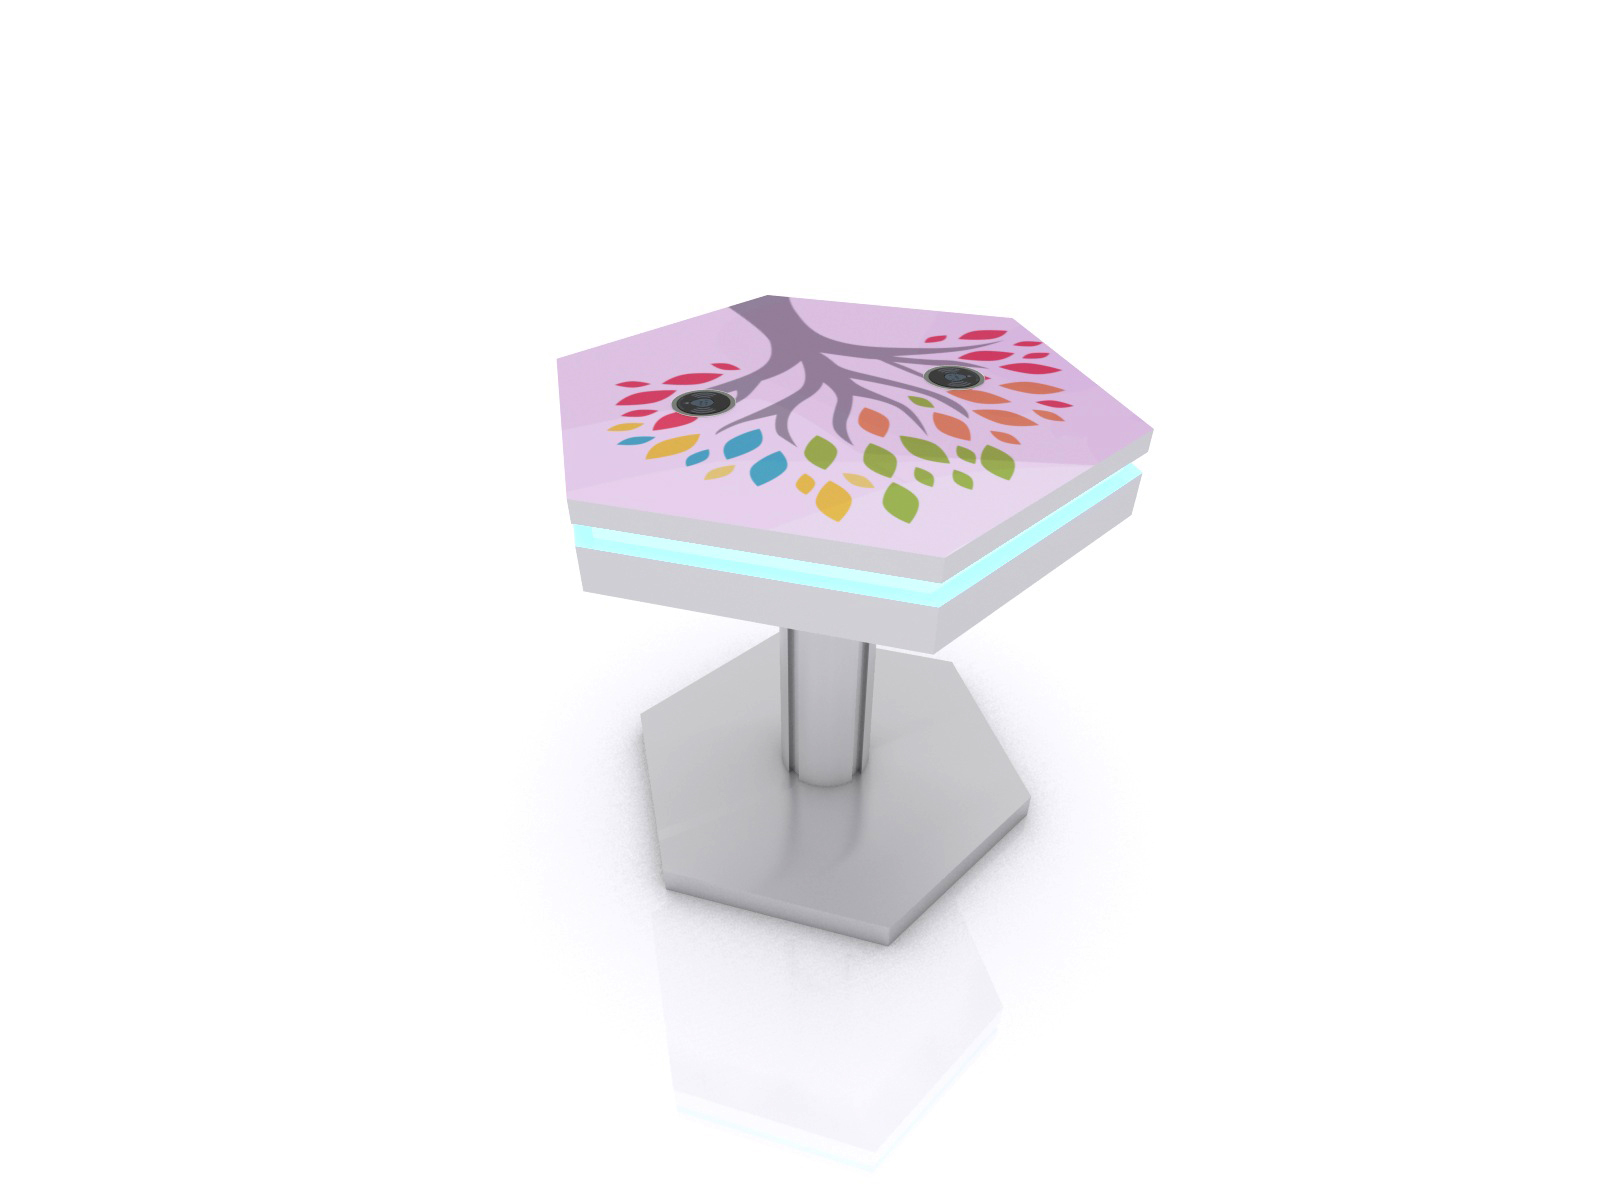 MOD-1466 Trade Show and Event Wireless End Table Charging Station -- Image 1 